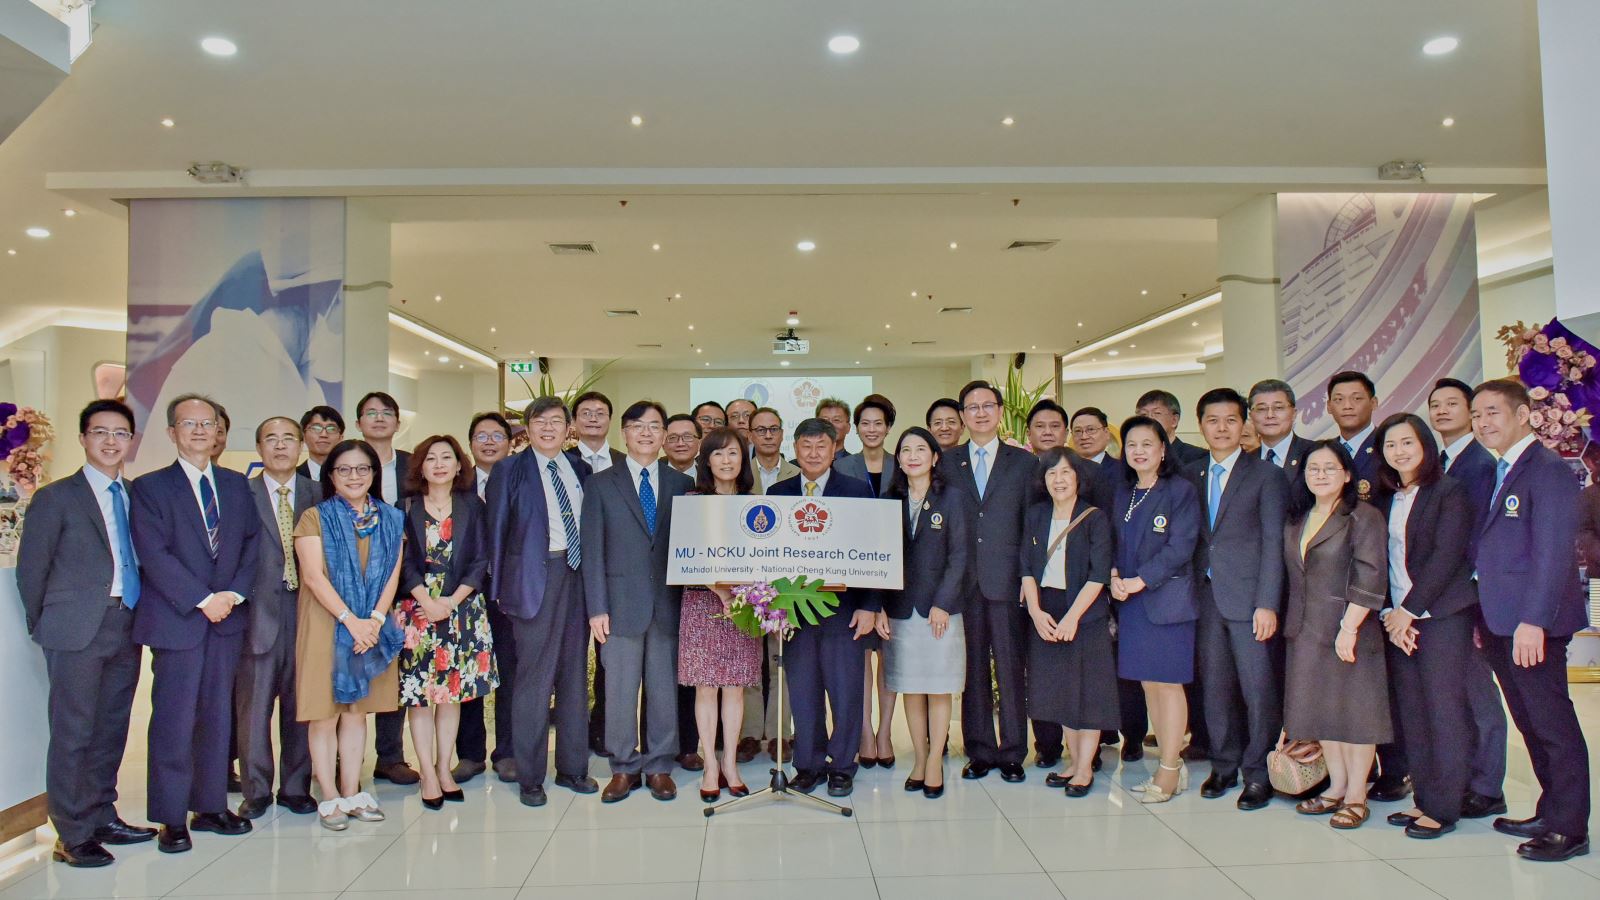 The opening ceremony of the MU-NCKU Joint Research Center in 2018